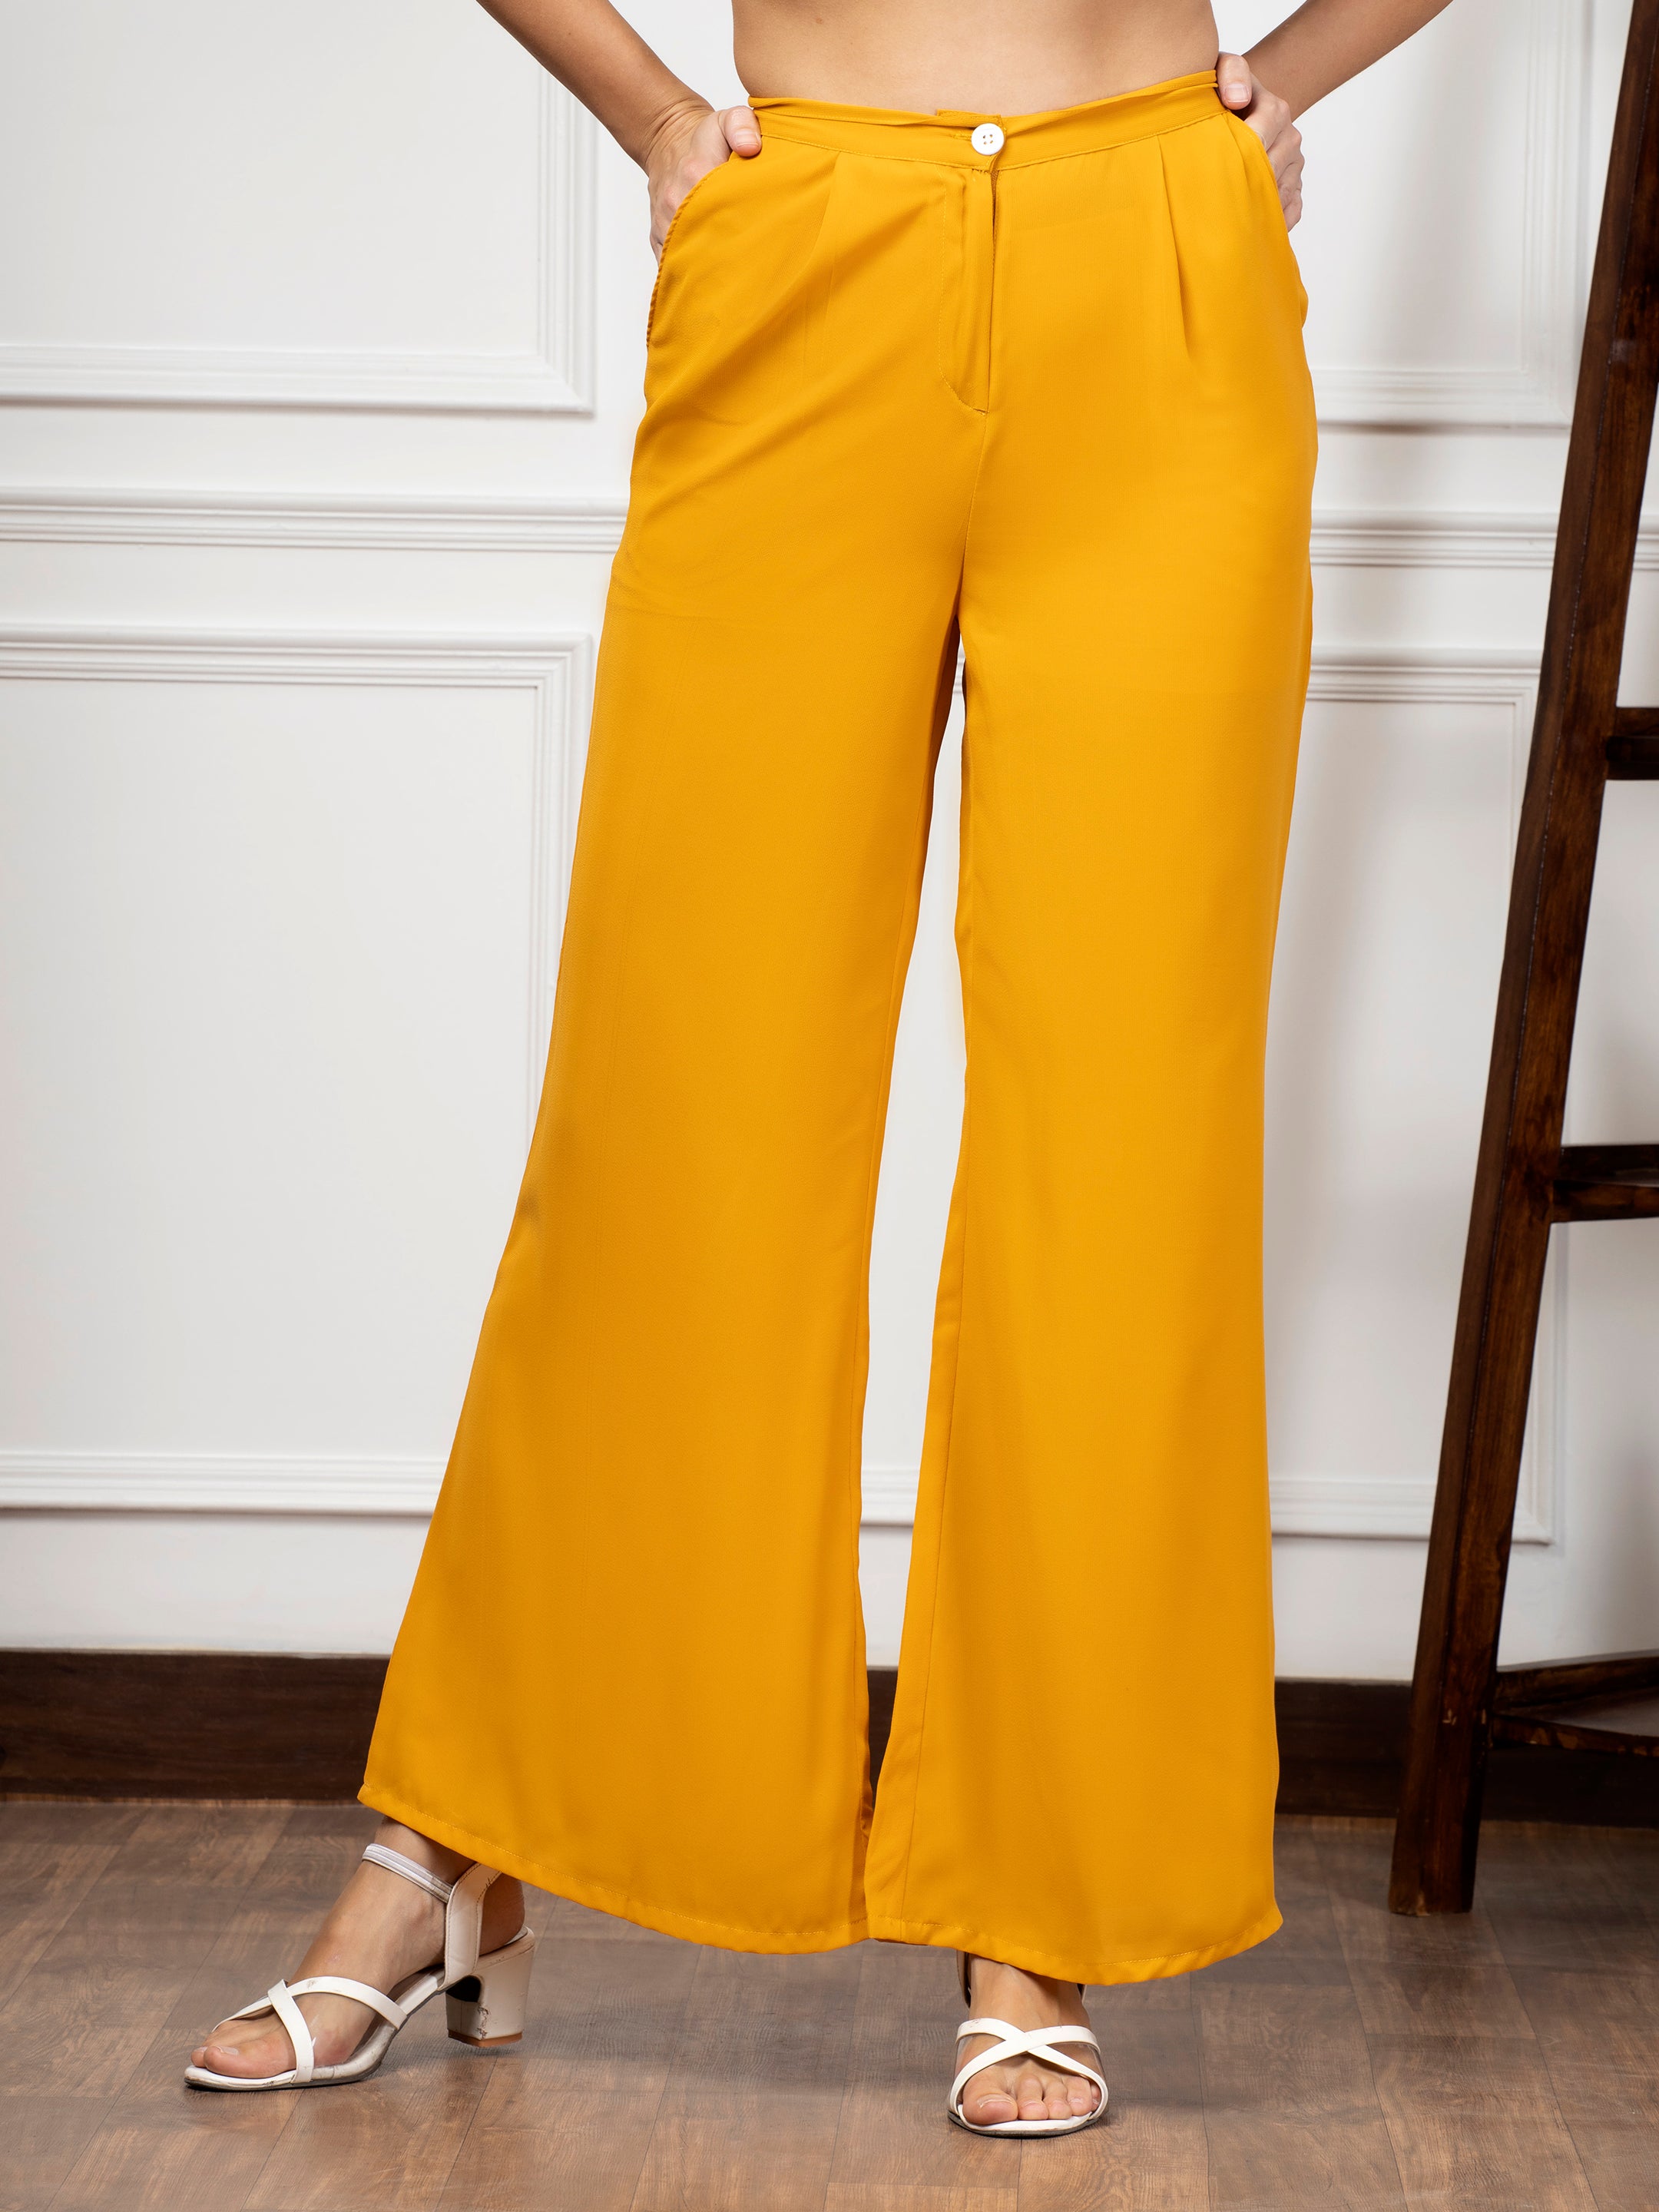 Buy Yellow and Navy Blue Combo of 2 Women Trouser Cotton Flax Pants for  Best Price Reviews Free Shipping